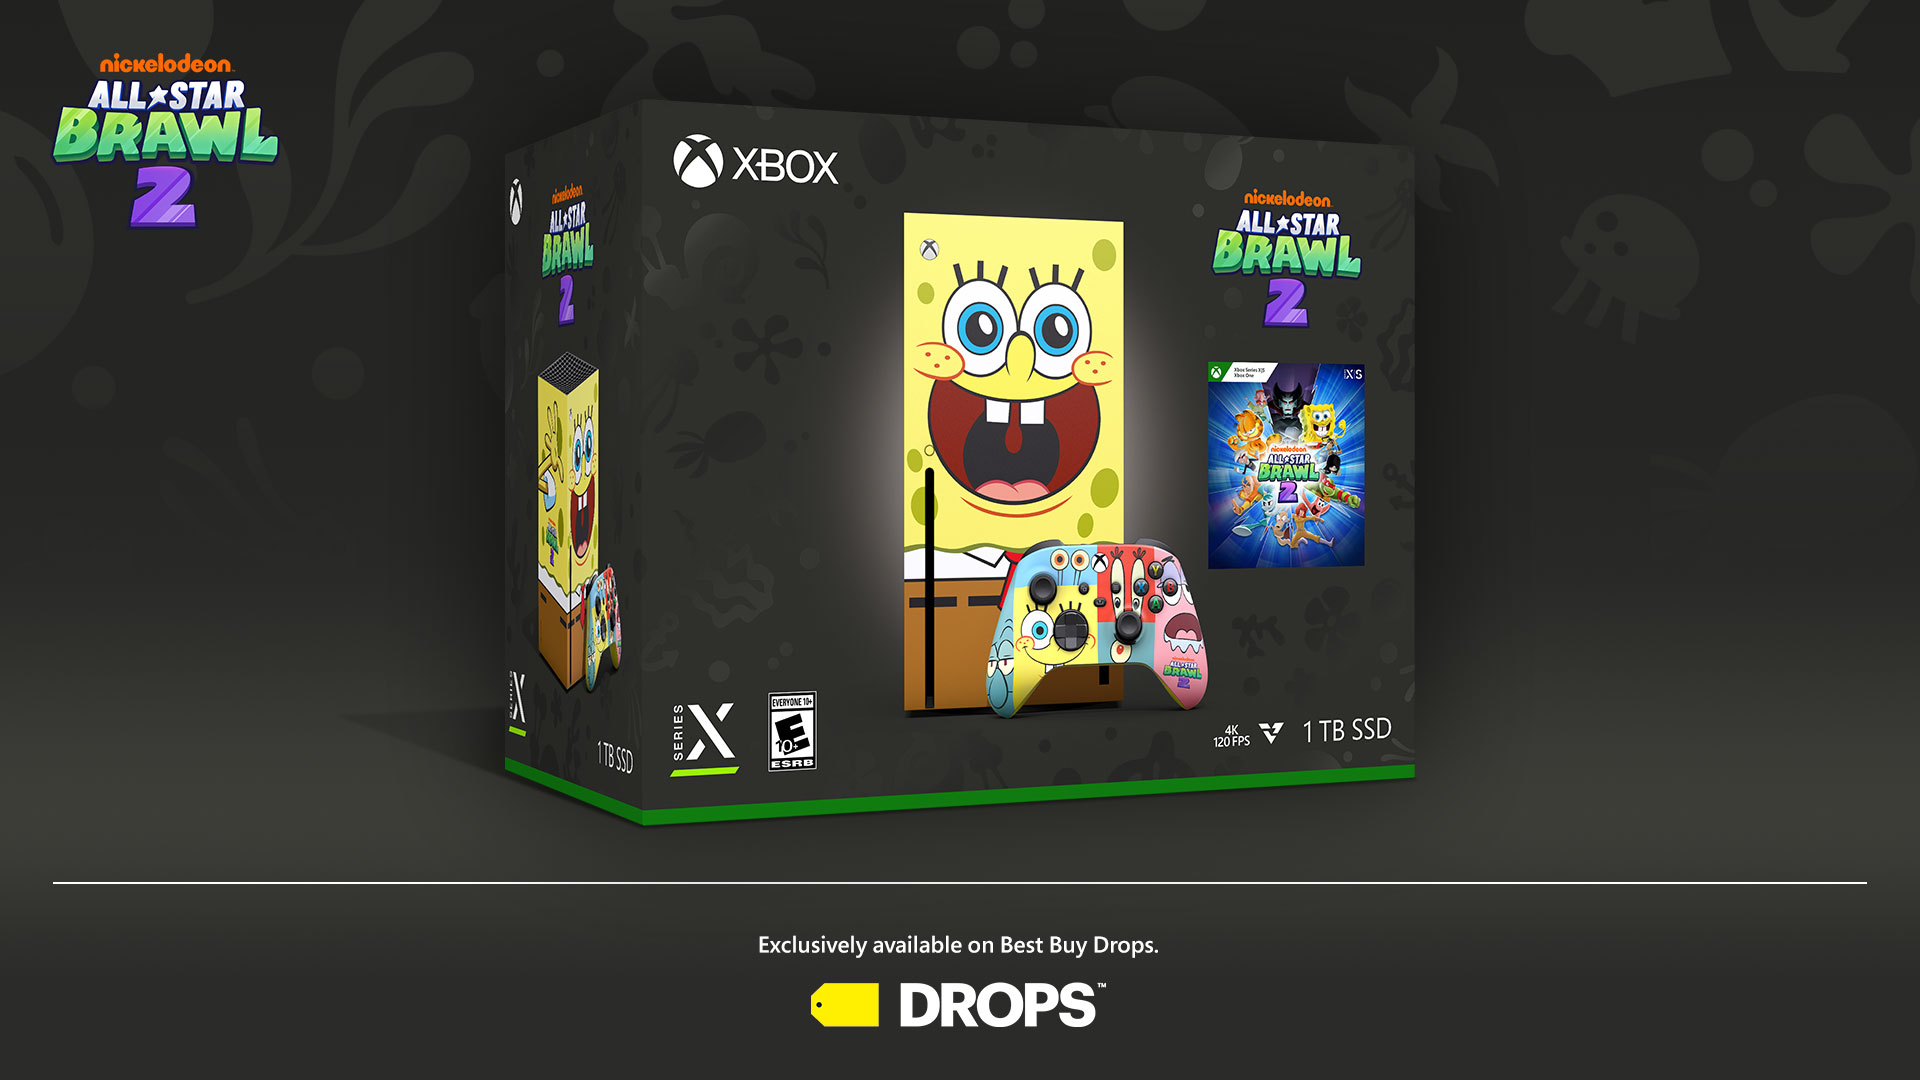 Xbox and Best Buy Launch Stunning SpongeBob-Inspired Special Edition Xbox Bundle